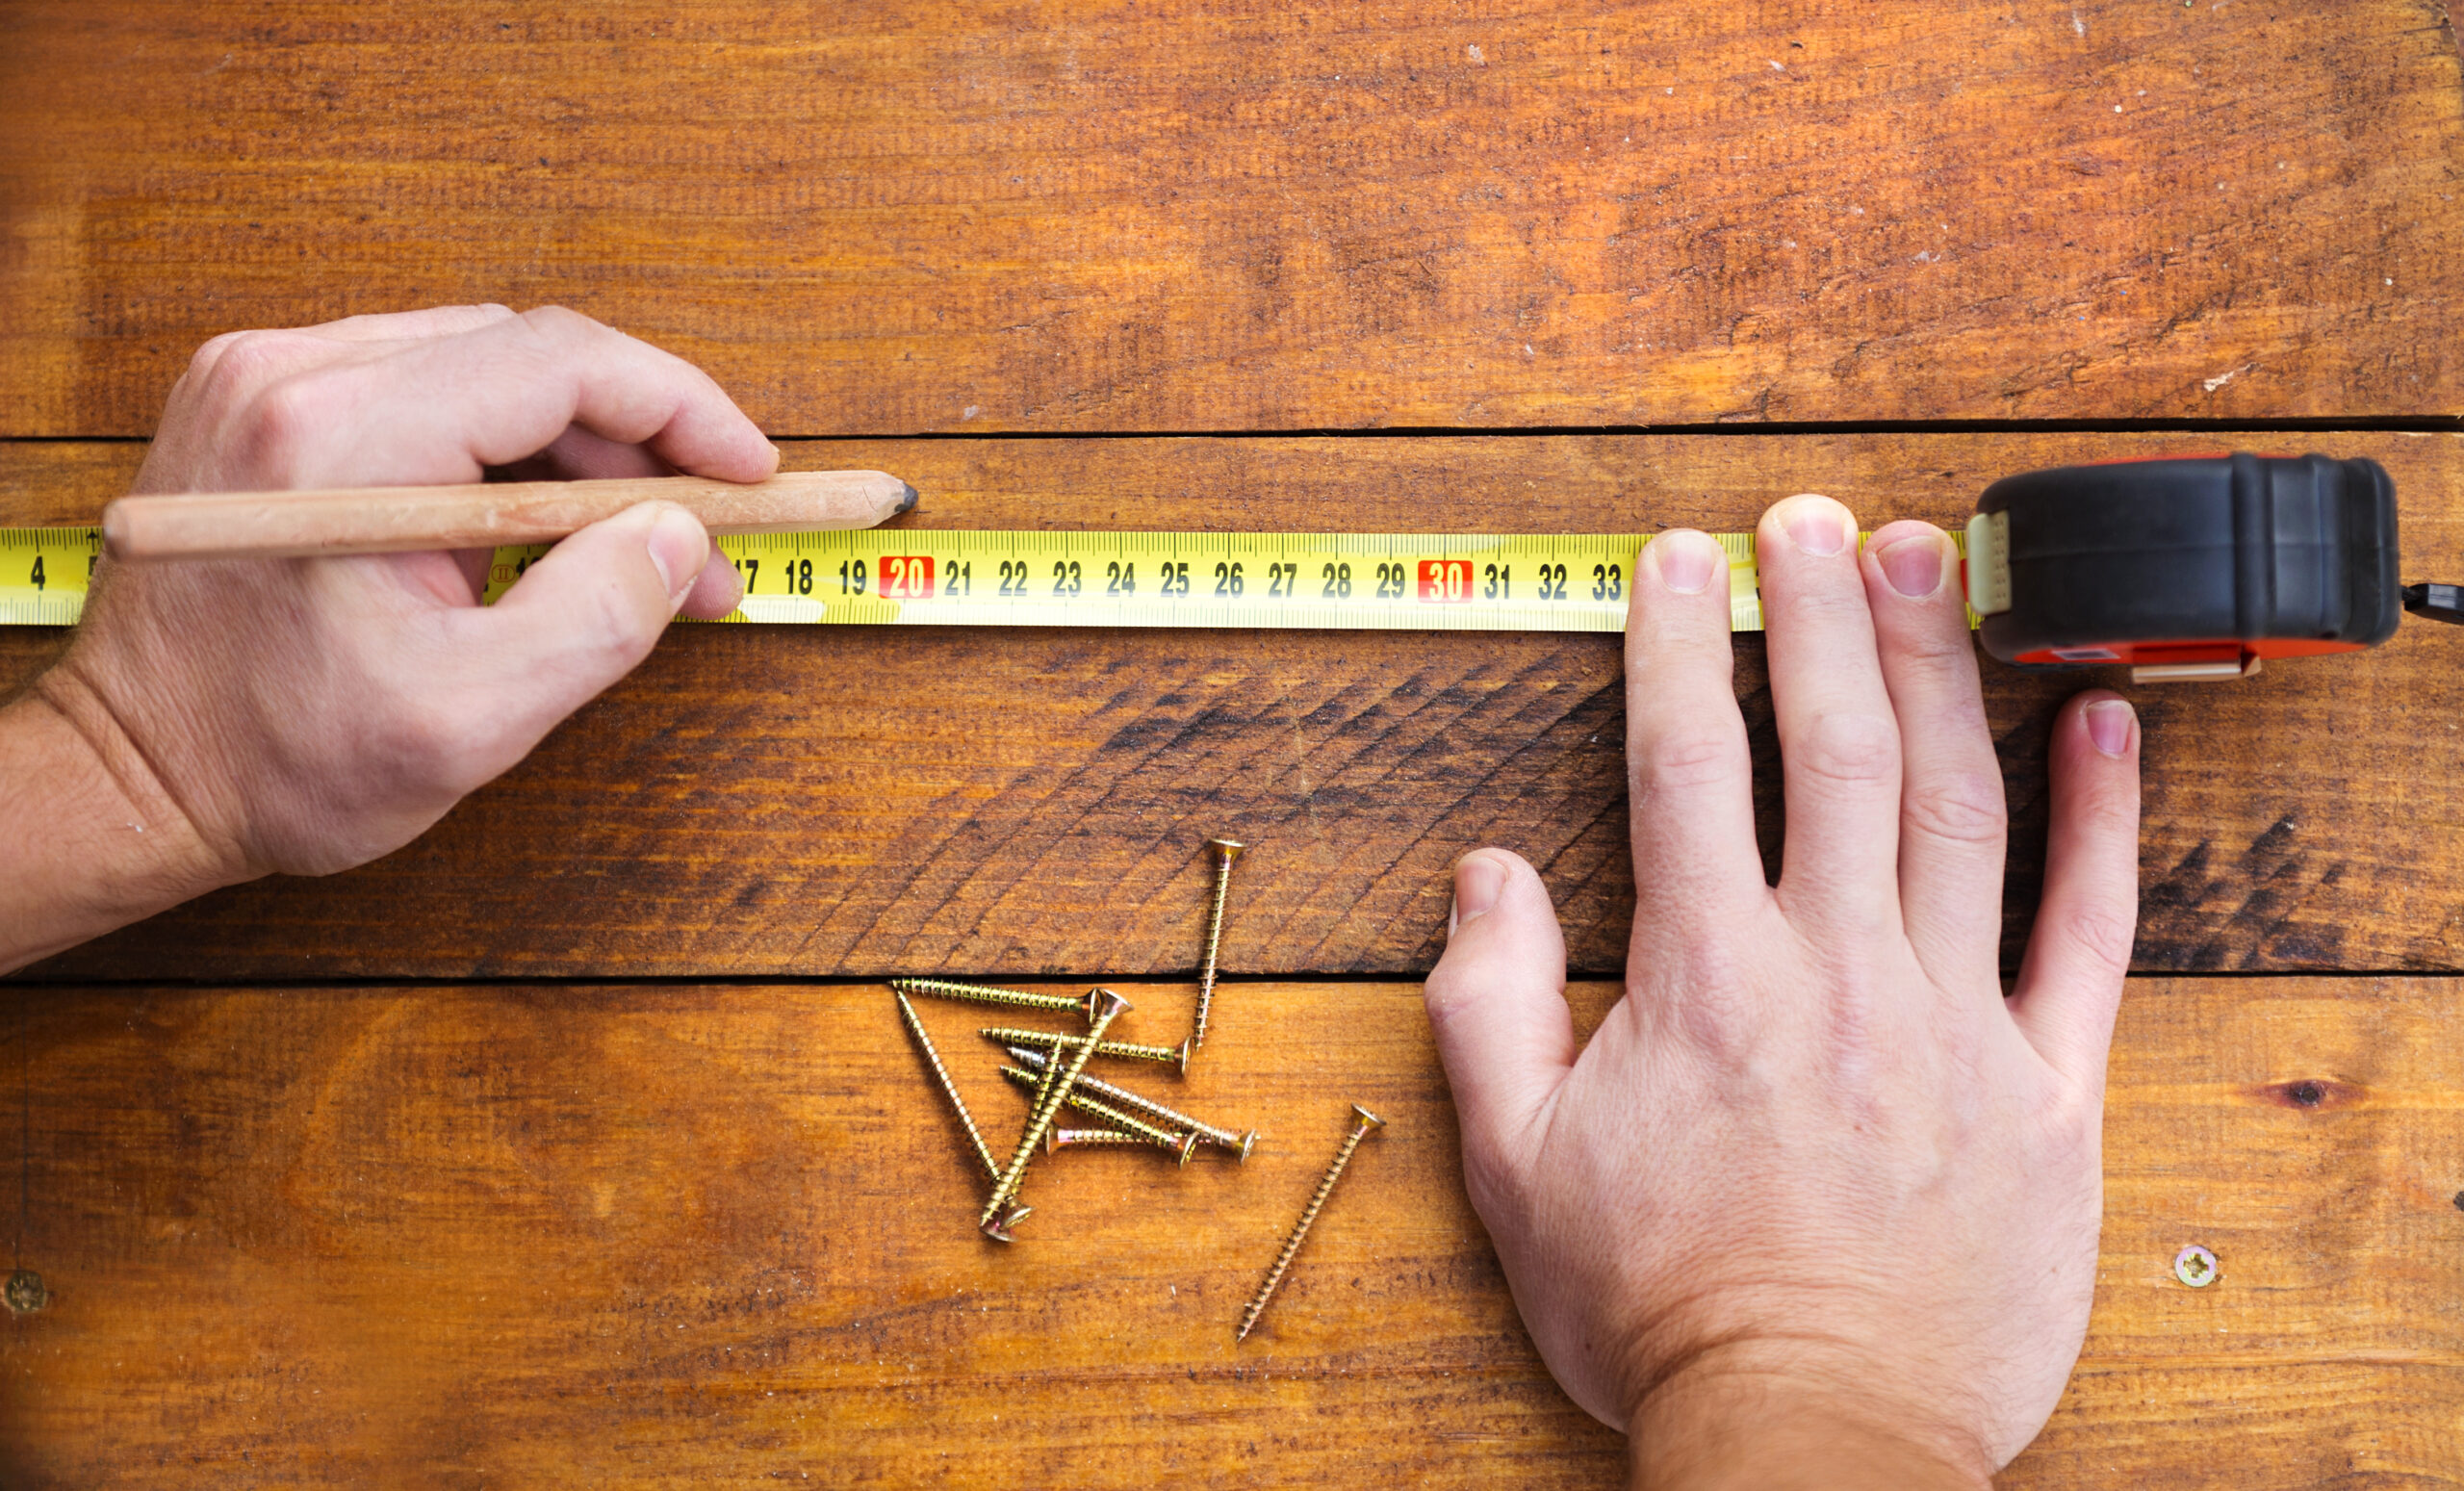 graphicstock-close-up-of-male-hand-measuring-and-marking-wood-flooring-with-tape-measure_rCPra2hWZ-scaled.jpg